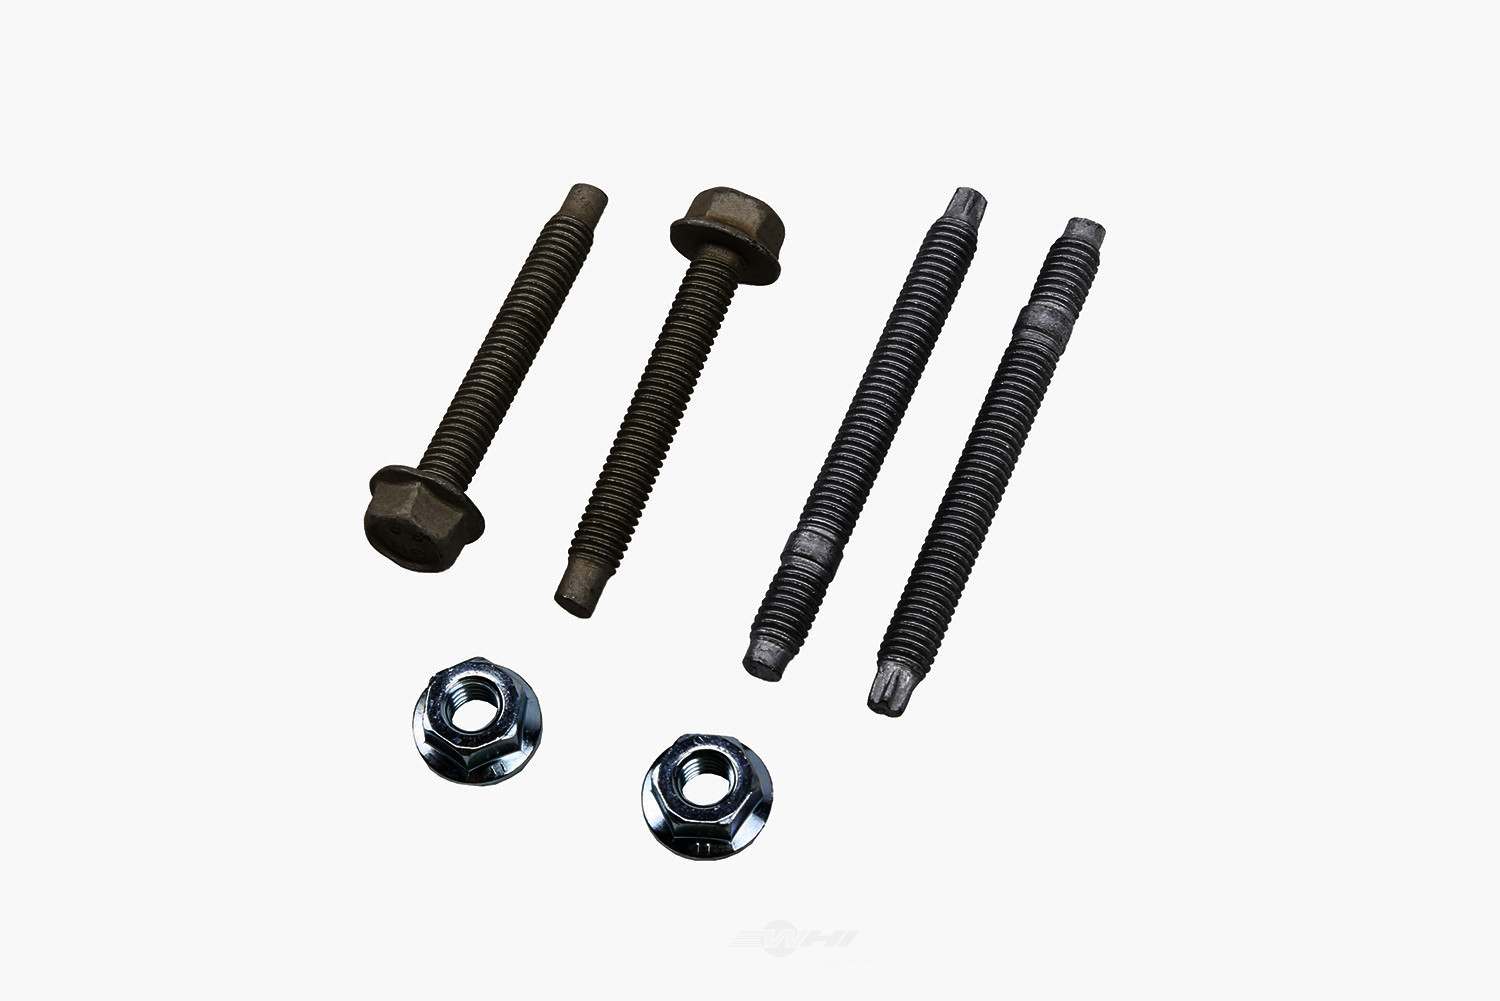 GM GENUINE PARTS - Fuel Injection Throttle Body Bolt Kit - GMP 89017591